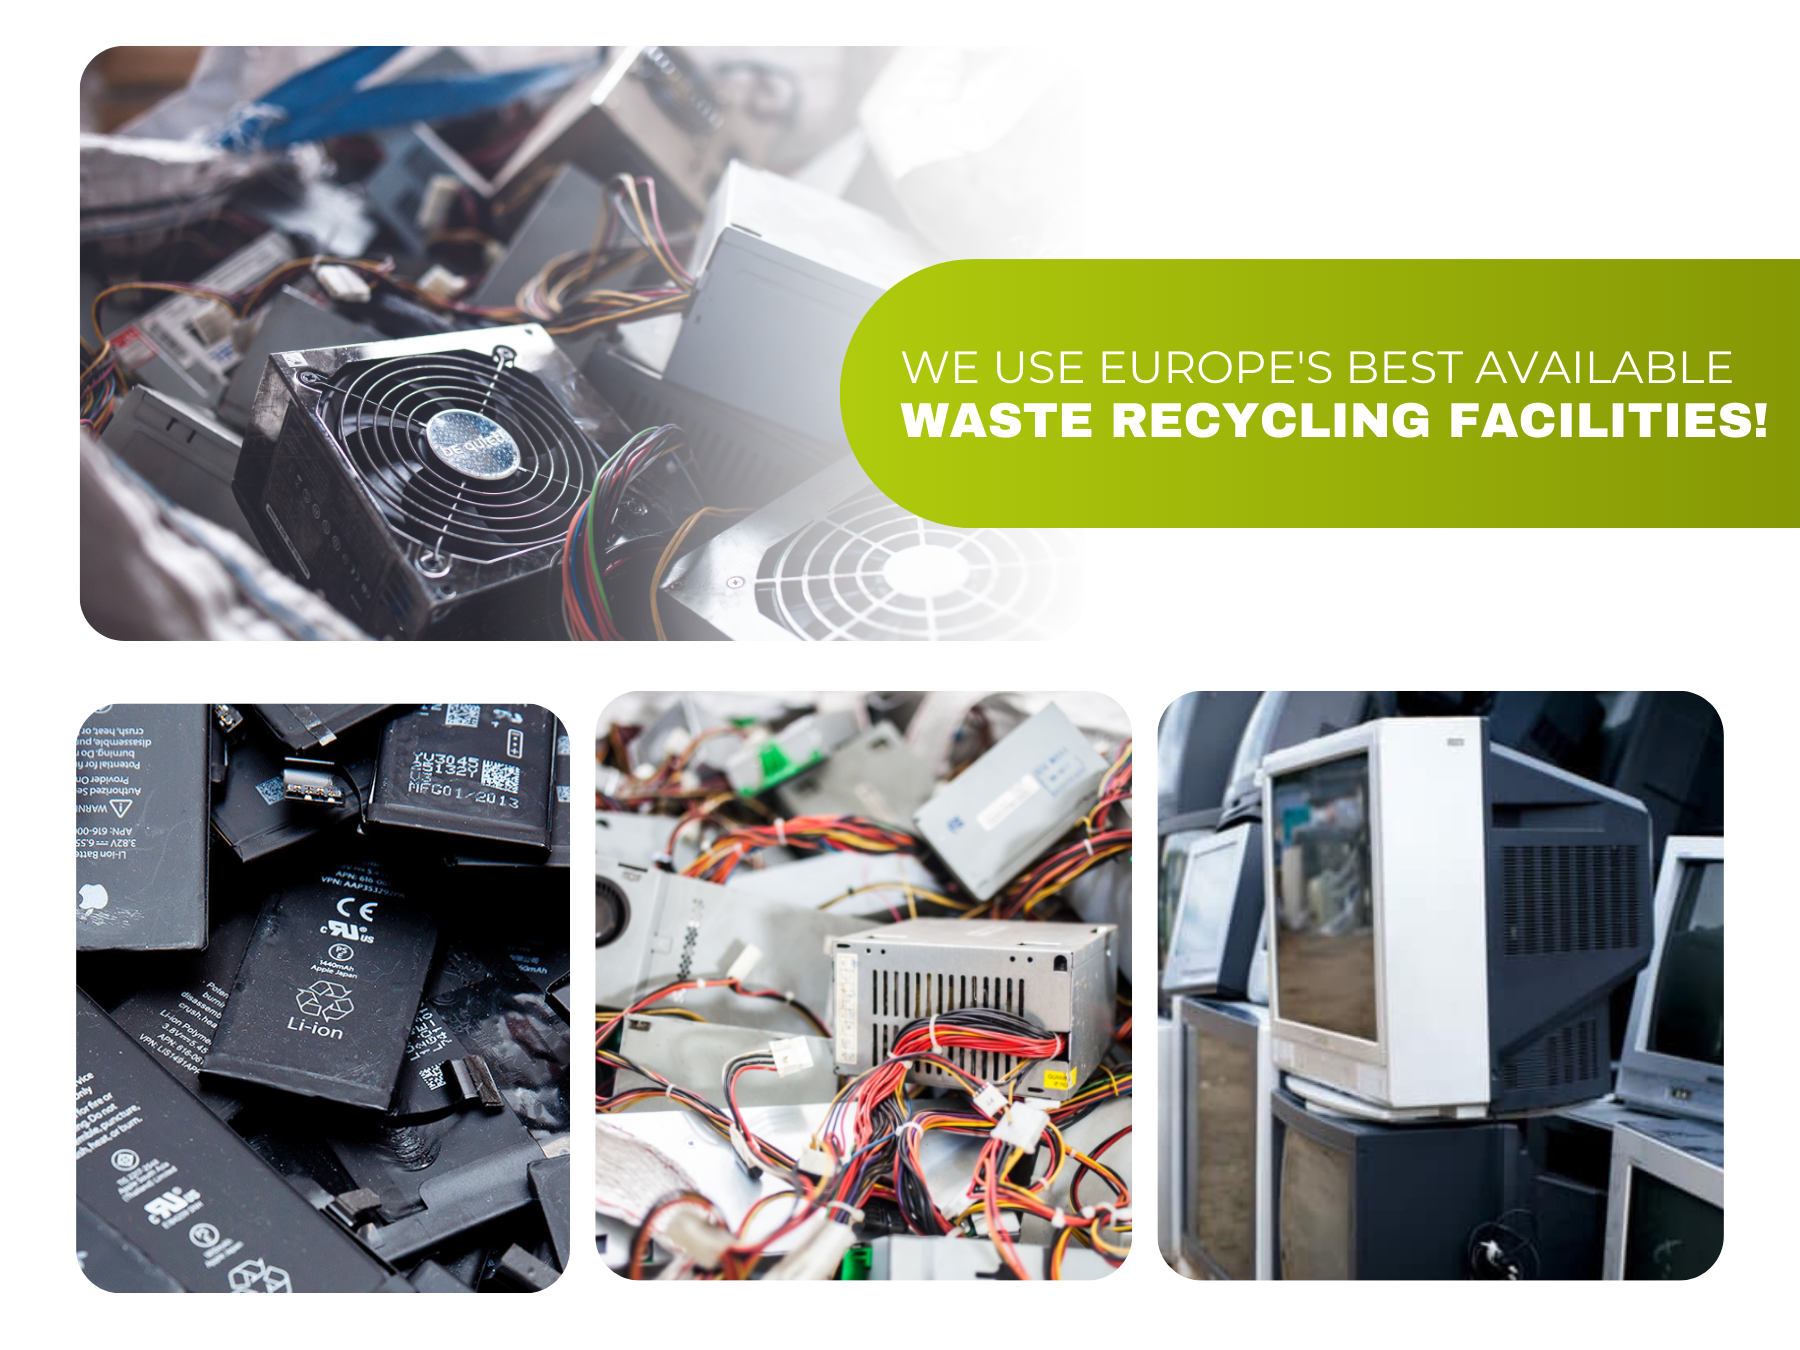 We use Europe's best available waste recycling facilities!